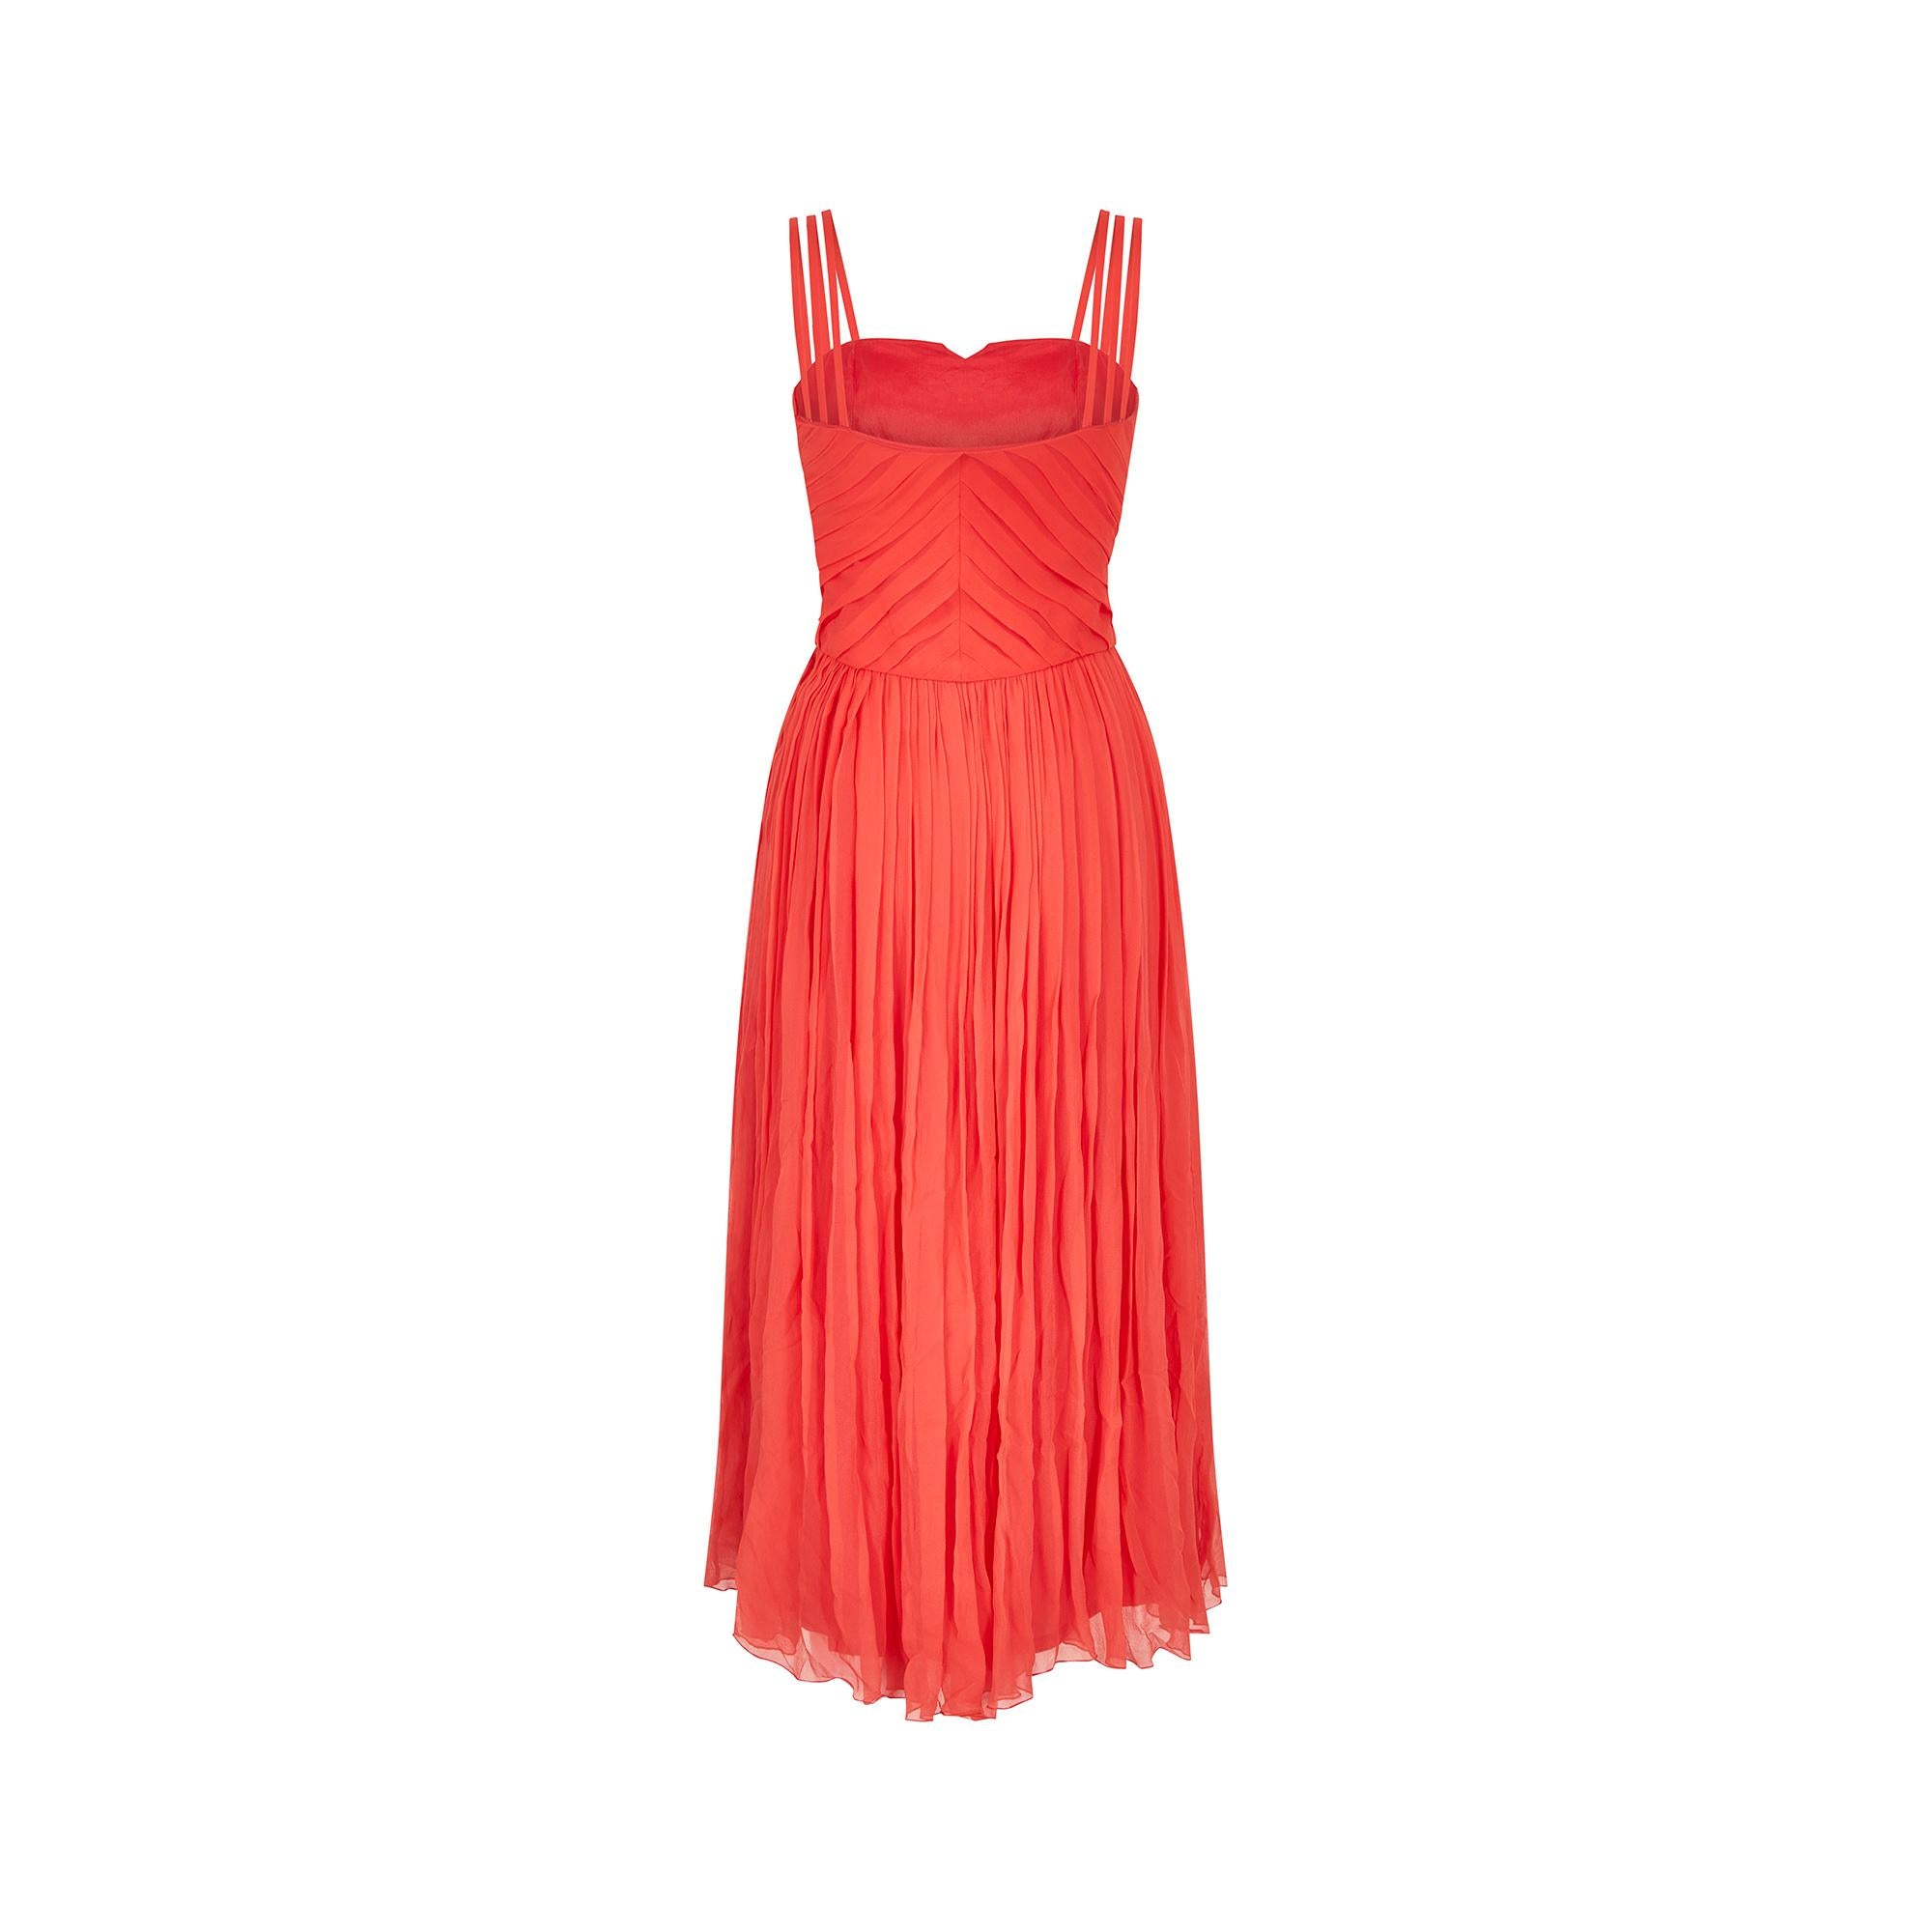 1980s Louis Feraud Silk Orange Pleated Chiffon Dress In Excellent Condition For Sale In London, GB